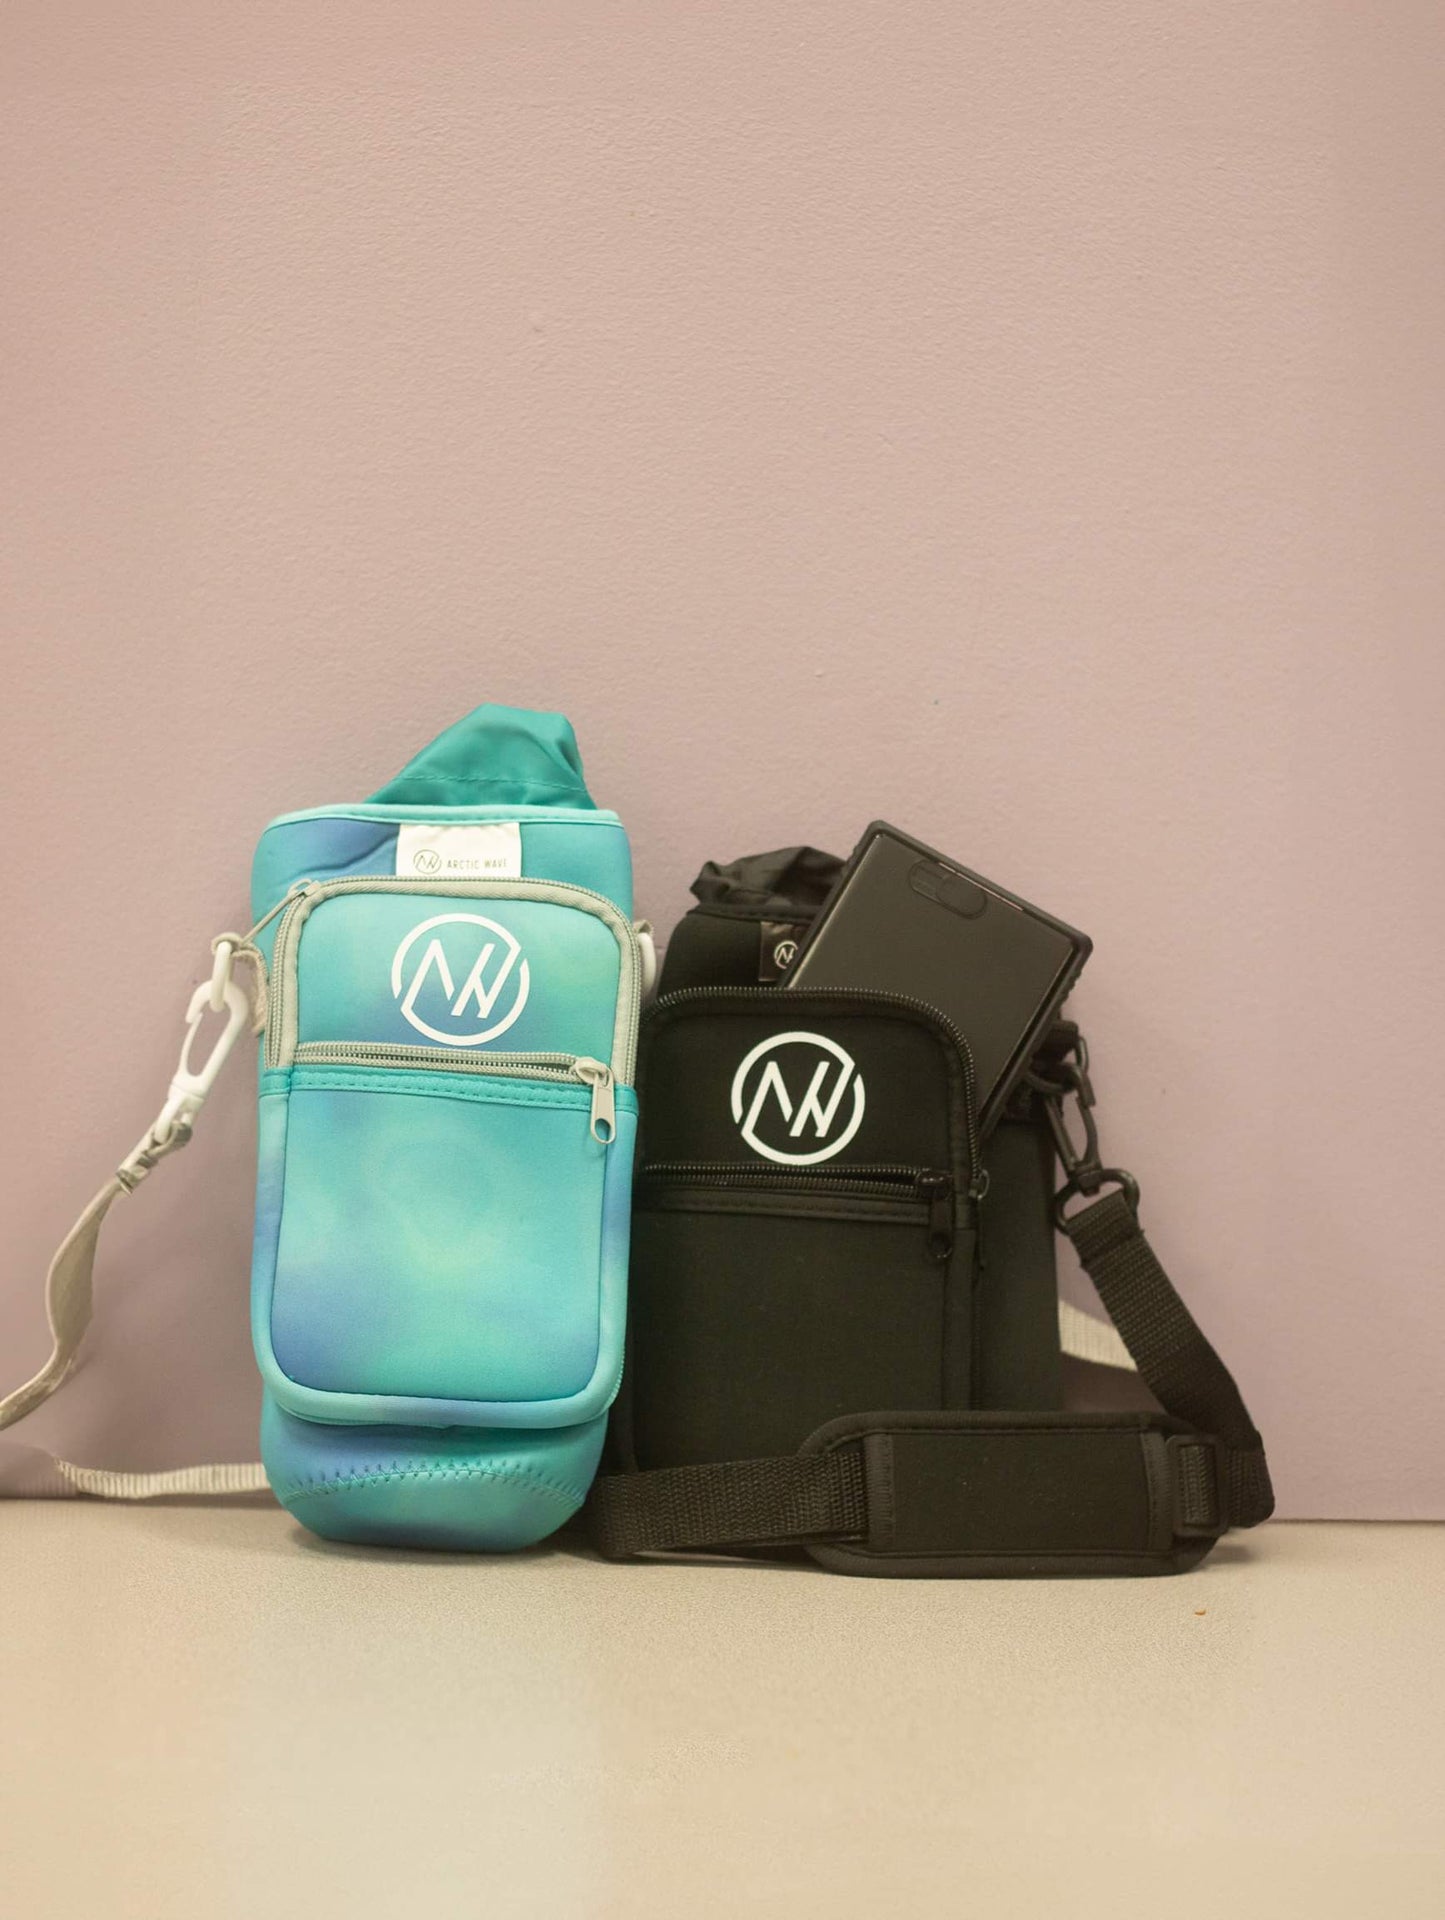 Water Bottle / Cell Phone Carrier Bag with a Shoulder Strap